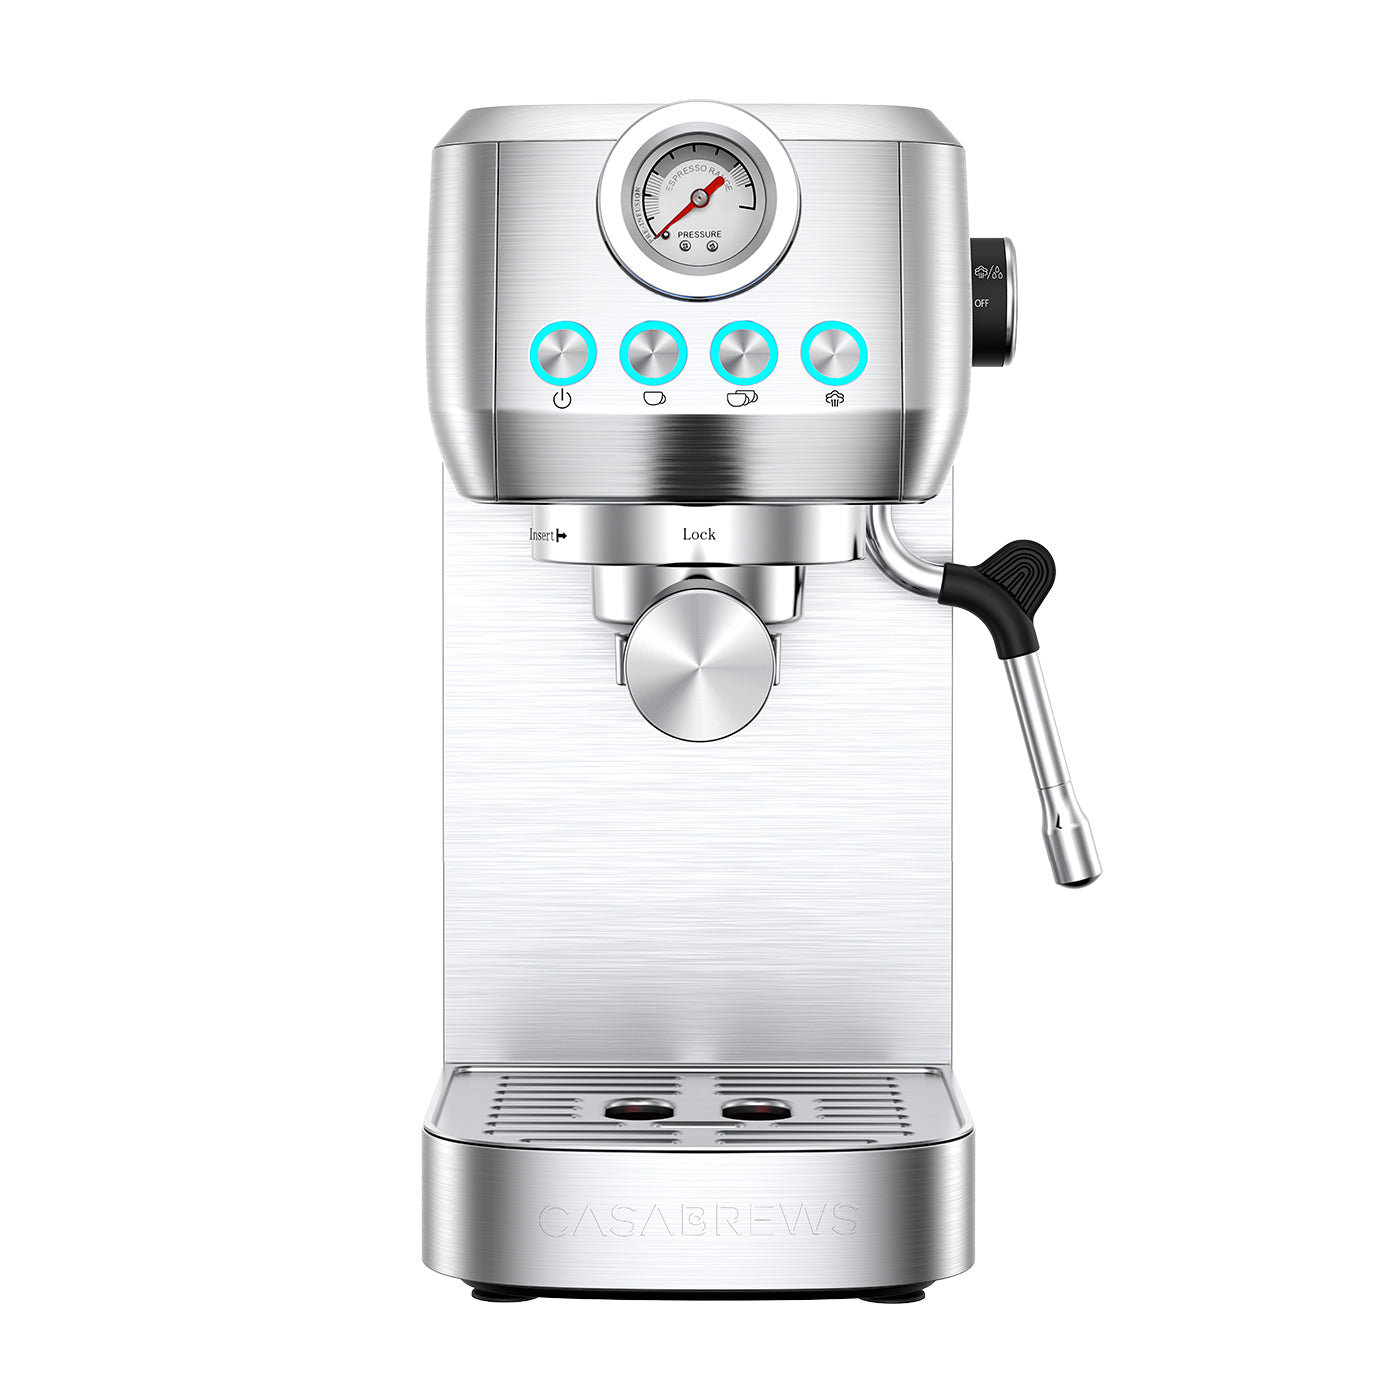 Milk Steamer and Frother—Dianoo Espresso Milk Steamer and Frother